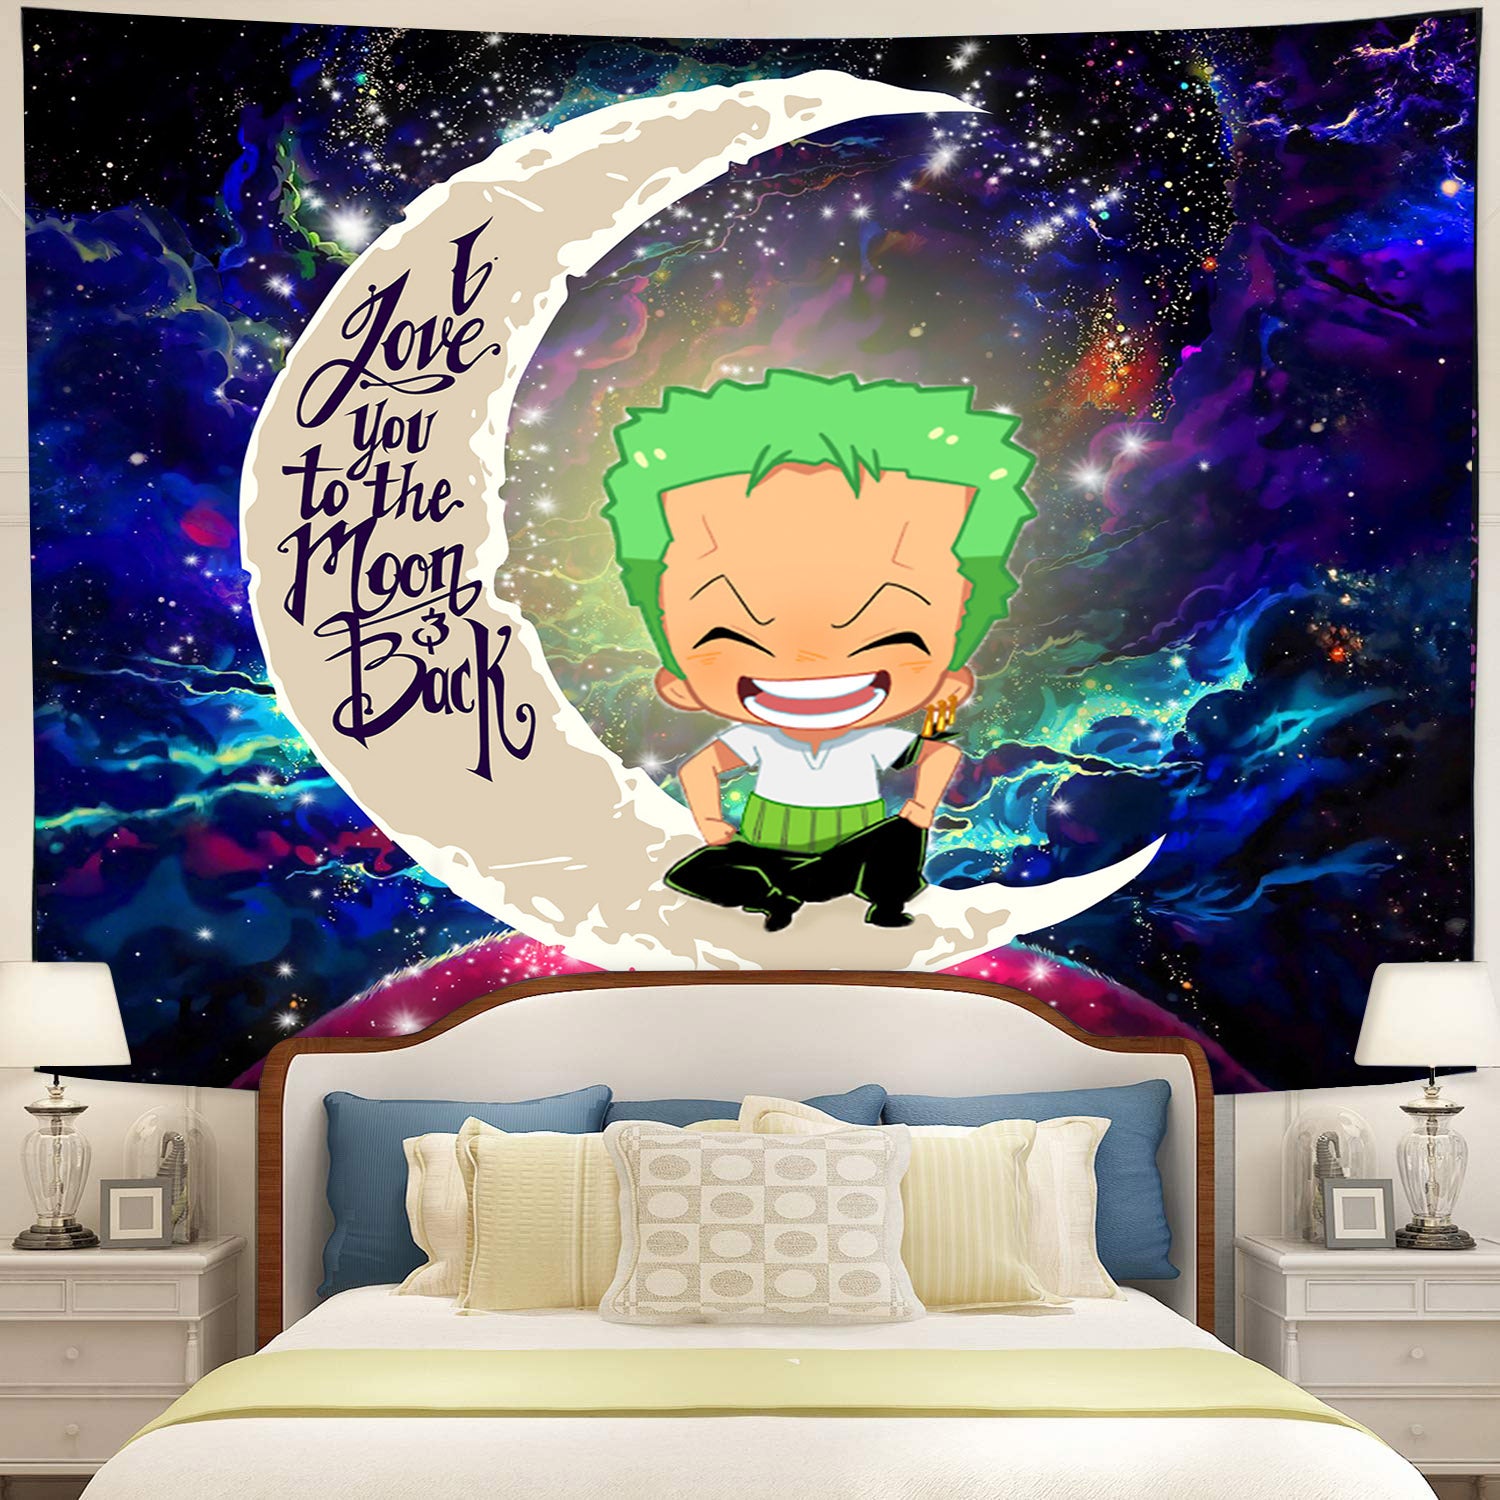 Zoro One Piece Moon And Back Galaxy Tapestry Room Decor